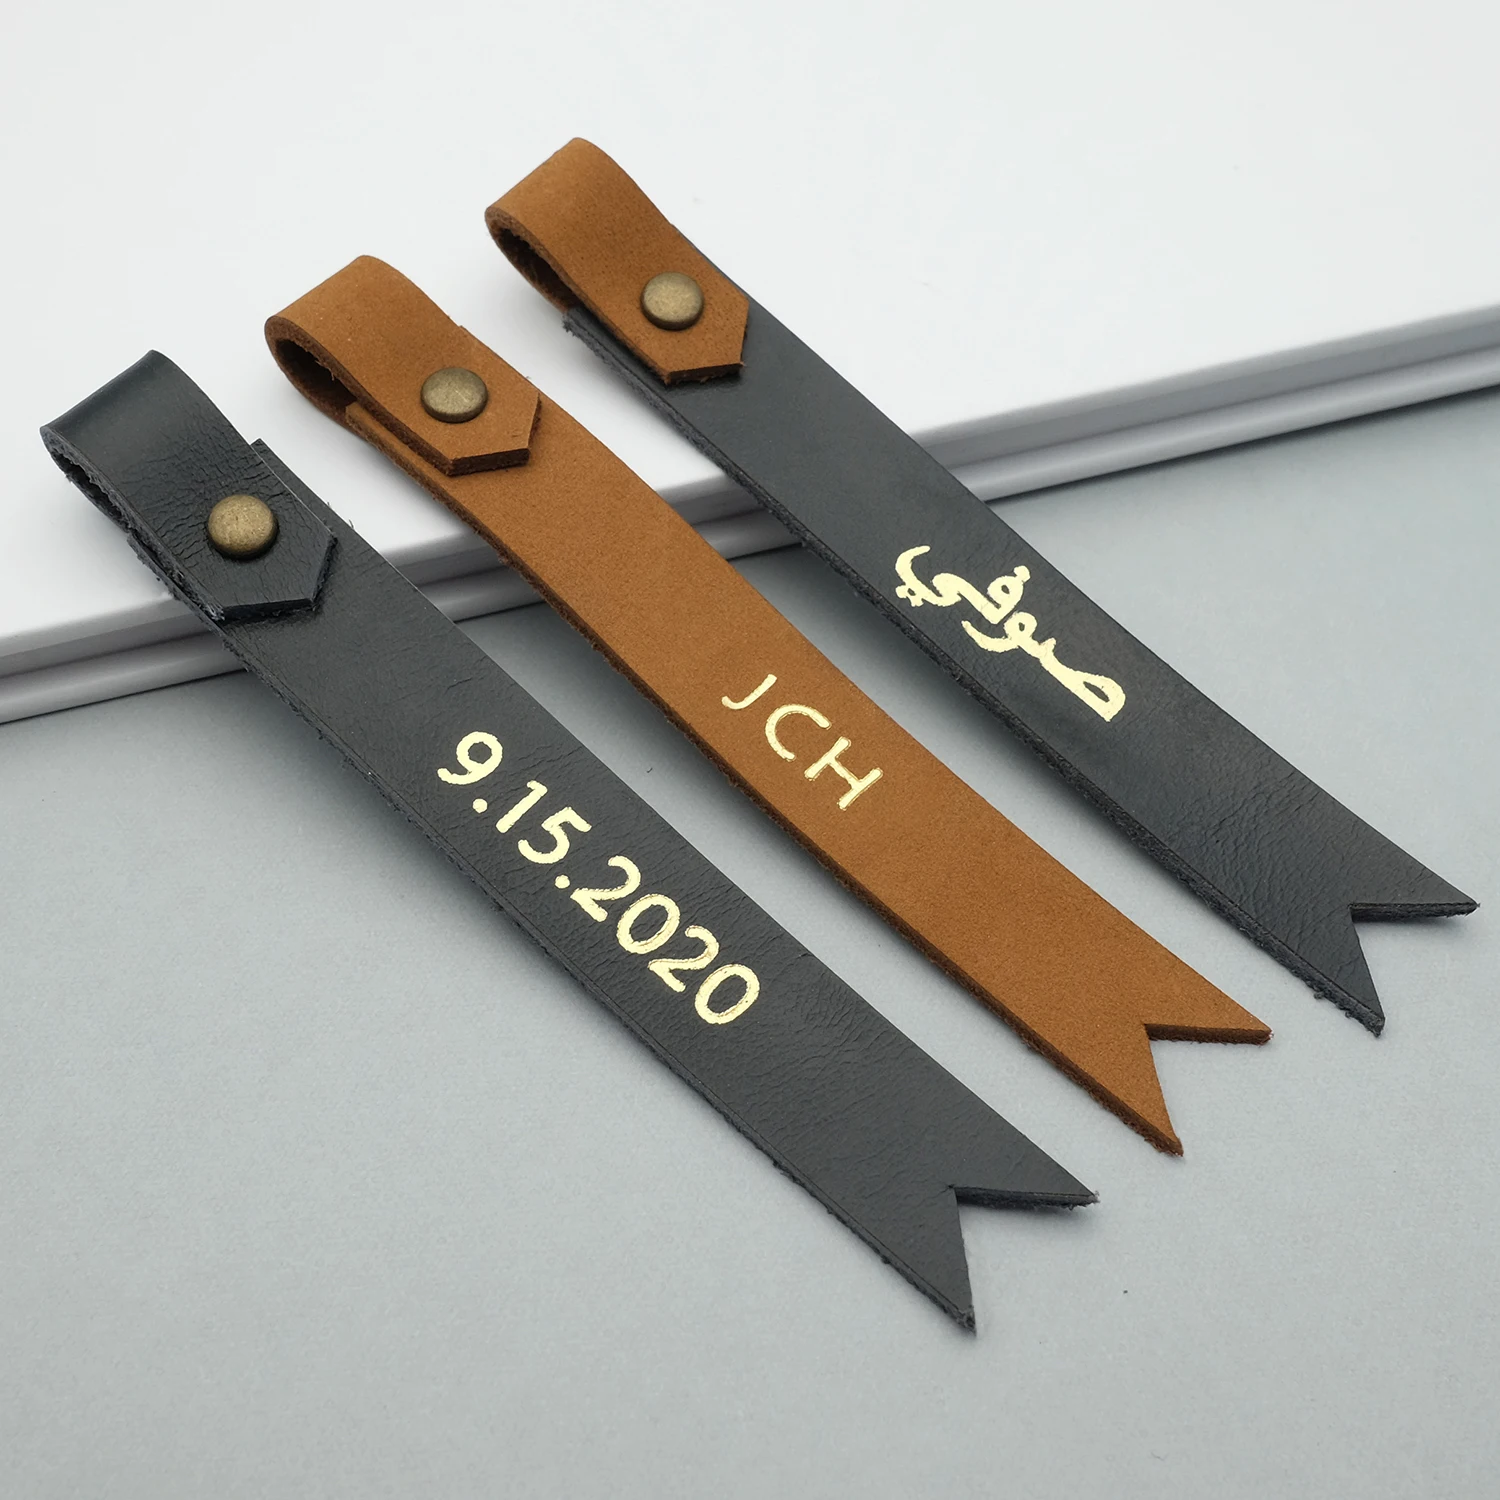 Custom Bookmark Personalised Bookmarks Custom Page Brand Engraved Leather Book Mark Reader Gift Personalised Gift popular lishi 2 in 1 2in1 tool hu66 hu92 hu87 nsn14 toy38r cy24 b106 gm37 gm39 yh35r fo38 hy17 sz14 kw14 key reader